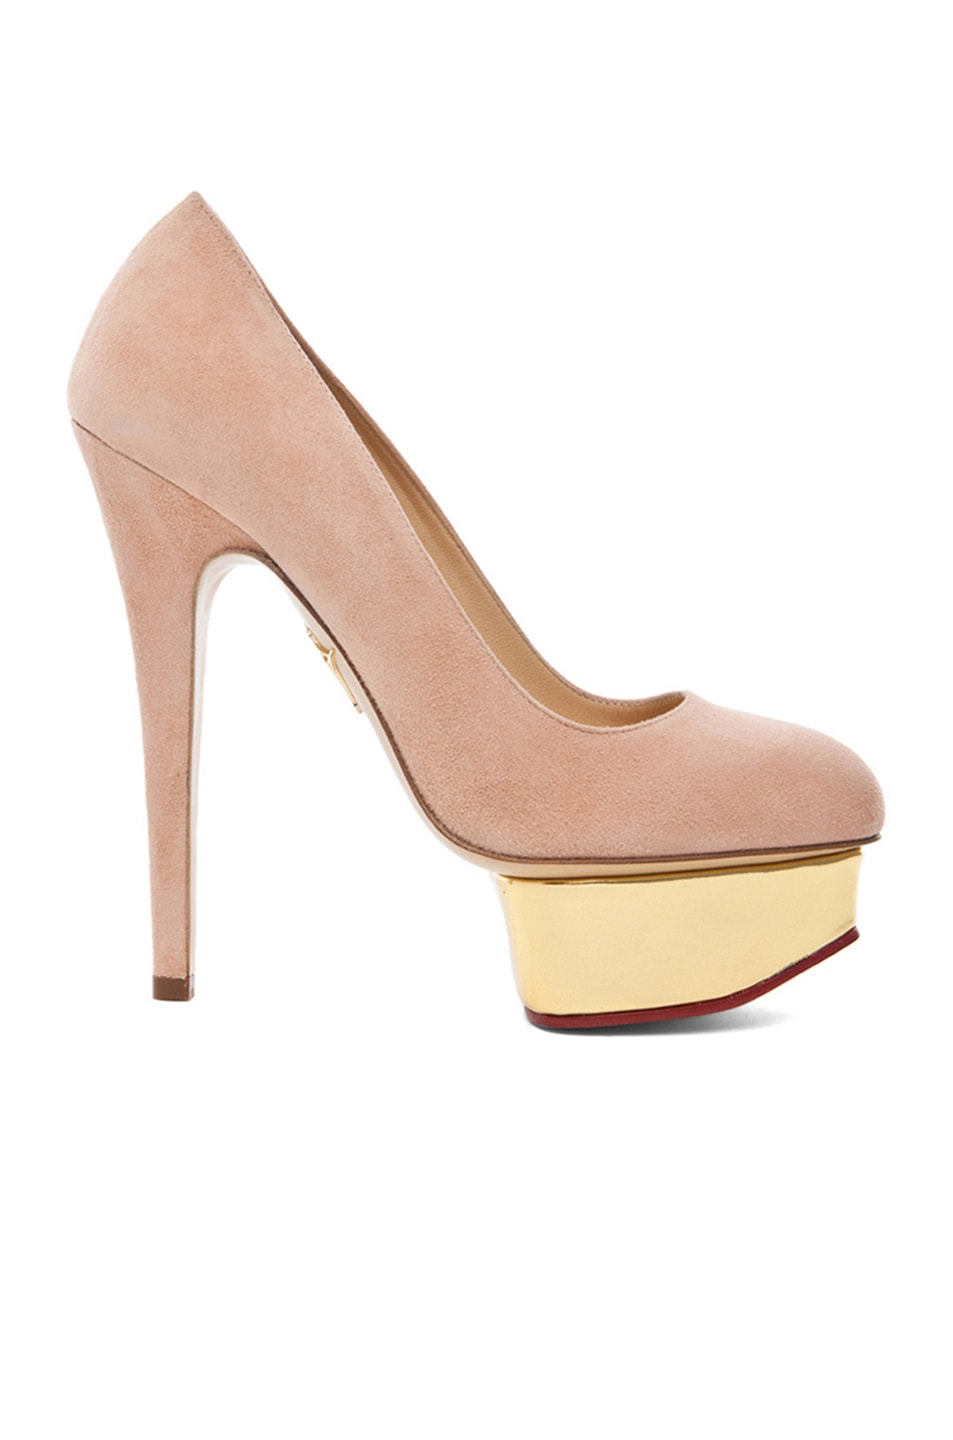 Image 1 of Charlotte Olympia Dolly Signature Court Island Suede Pumps in Blush Suede